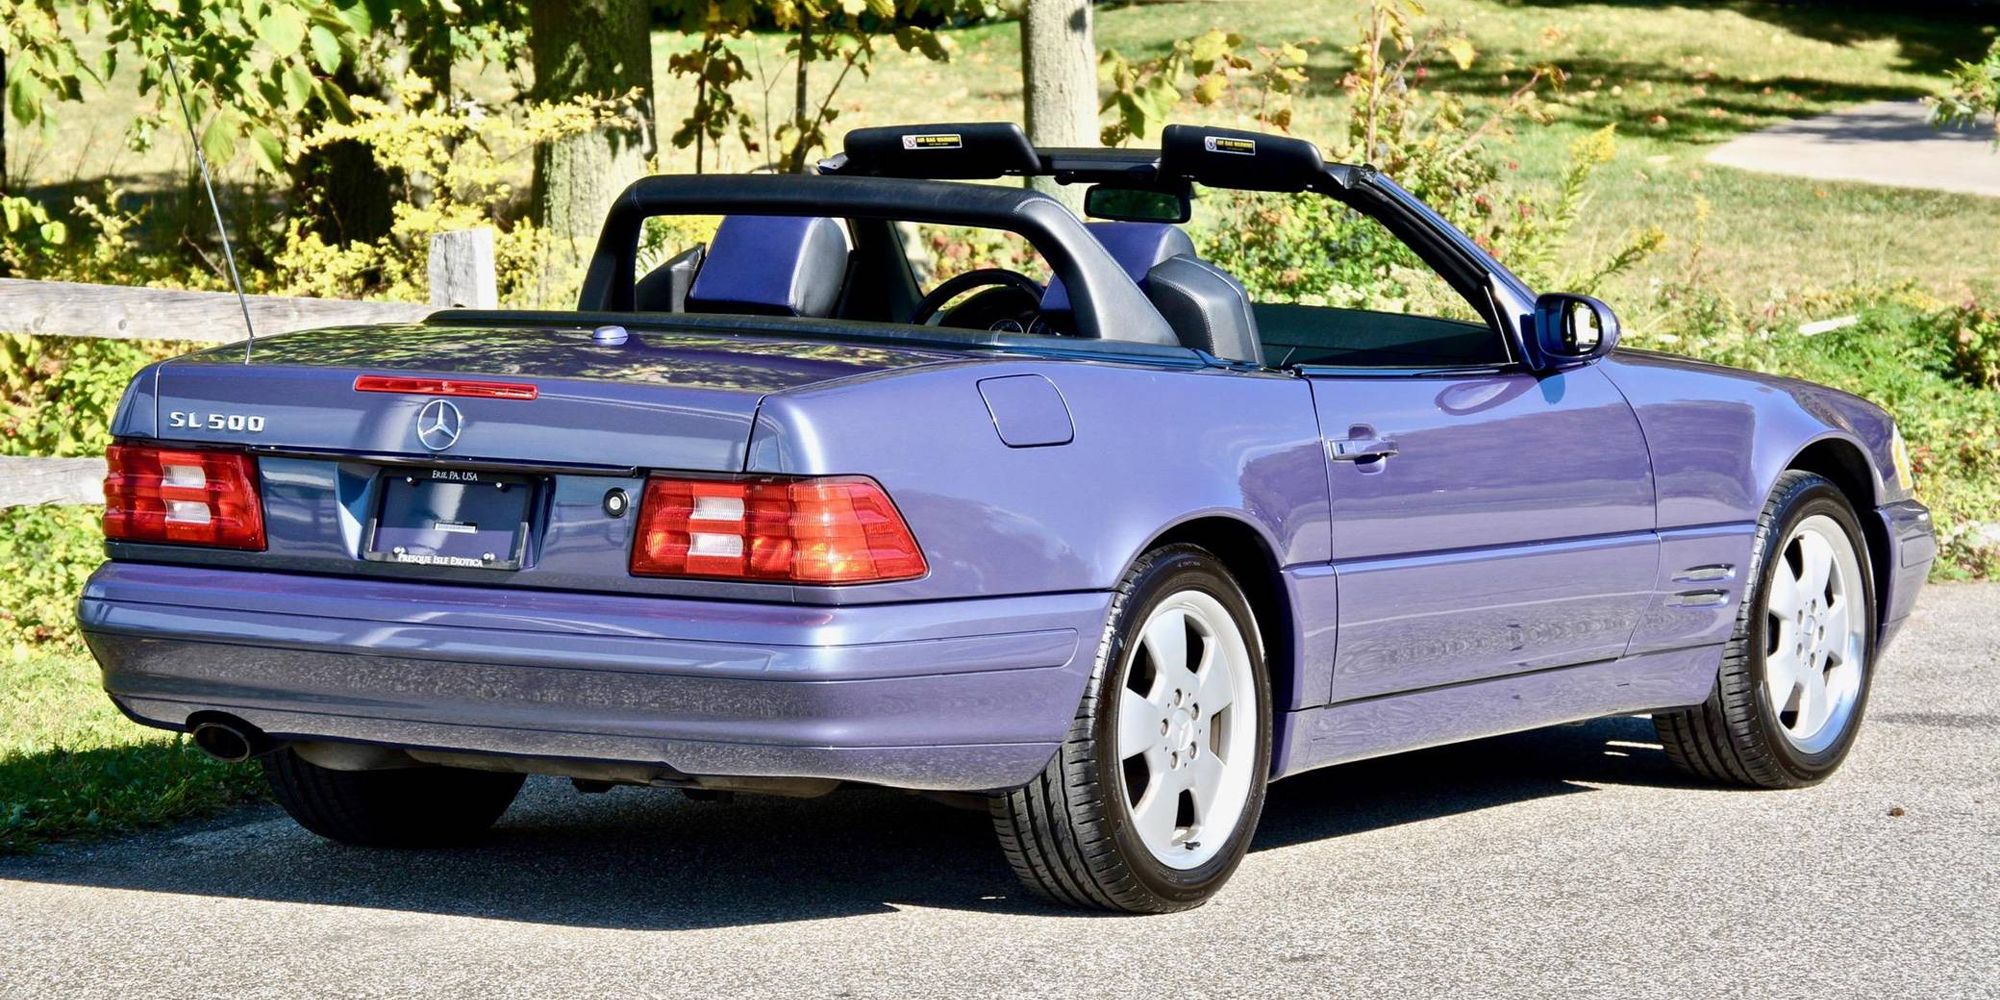 The rear of a purple R129